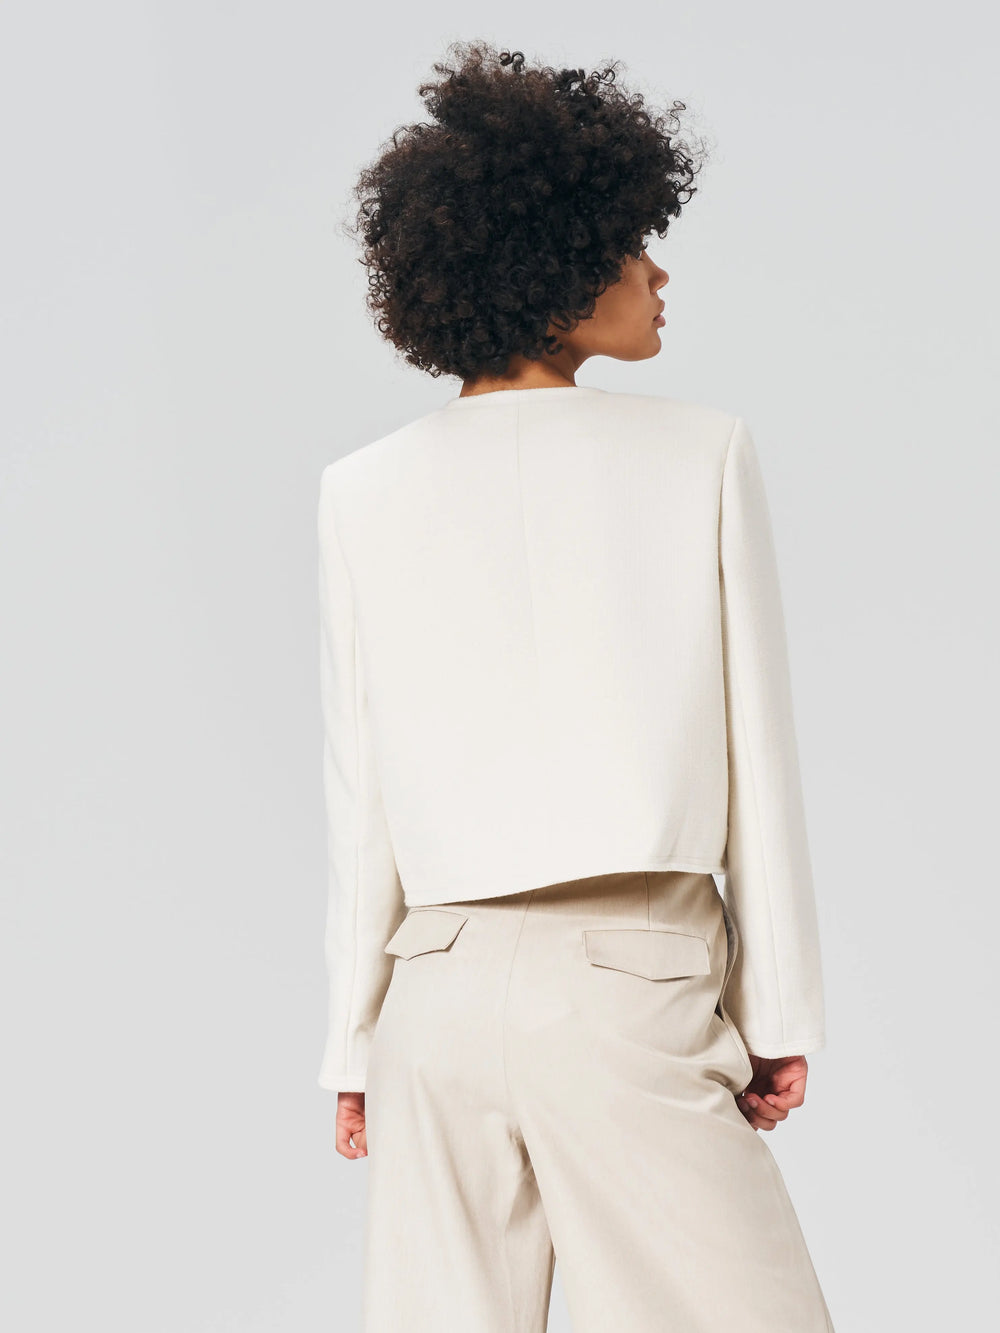 An image of a   25617 Scoop-Neck Jacket by  Mirra Masa